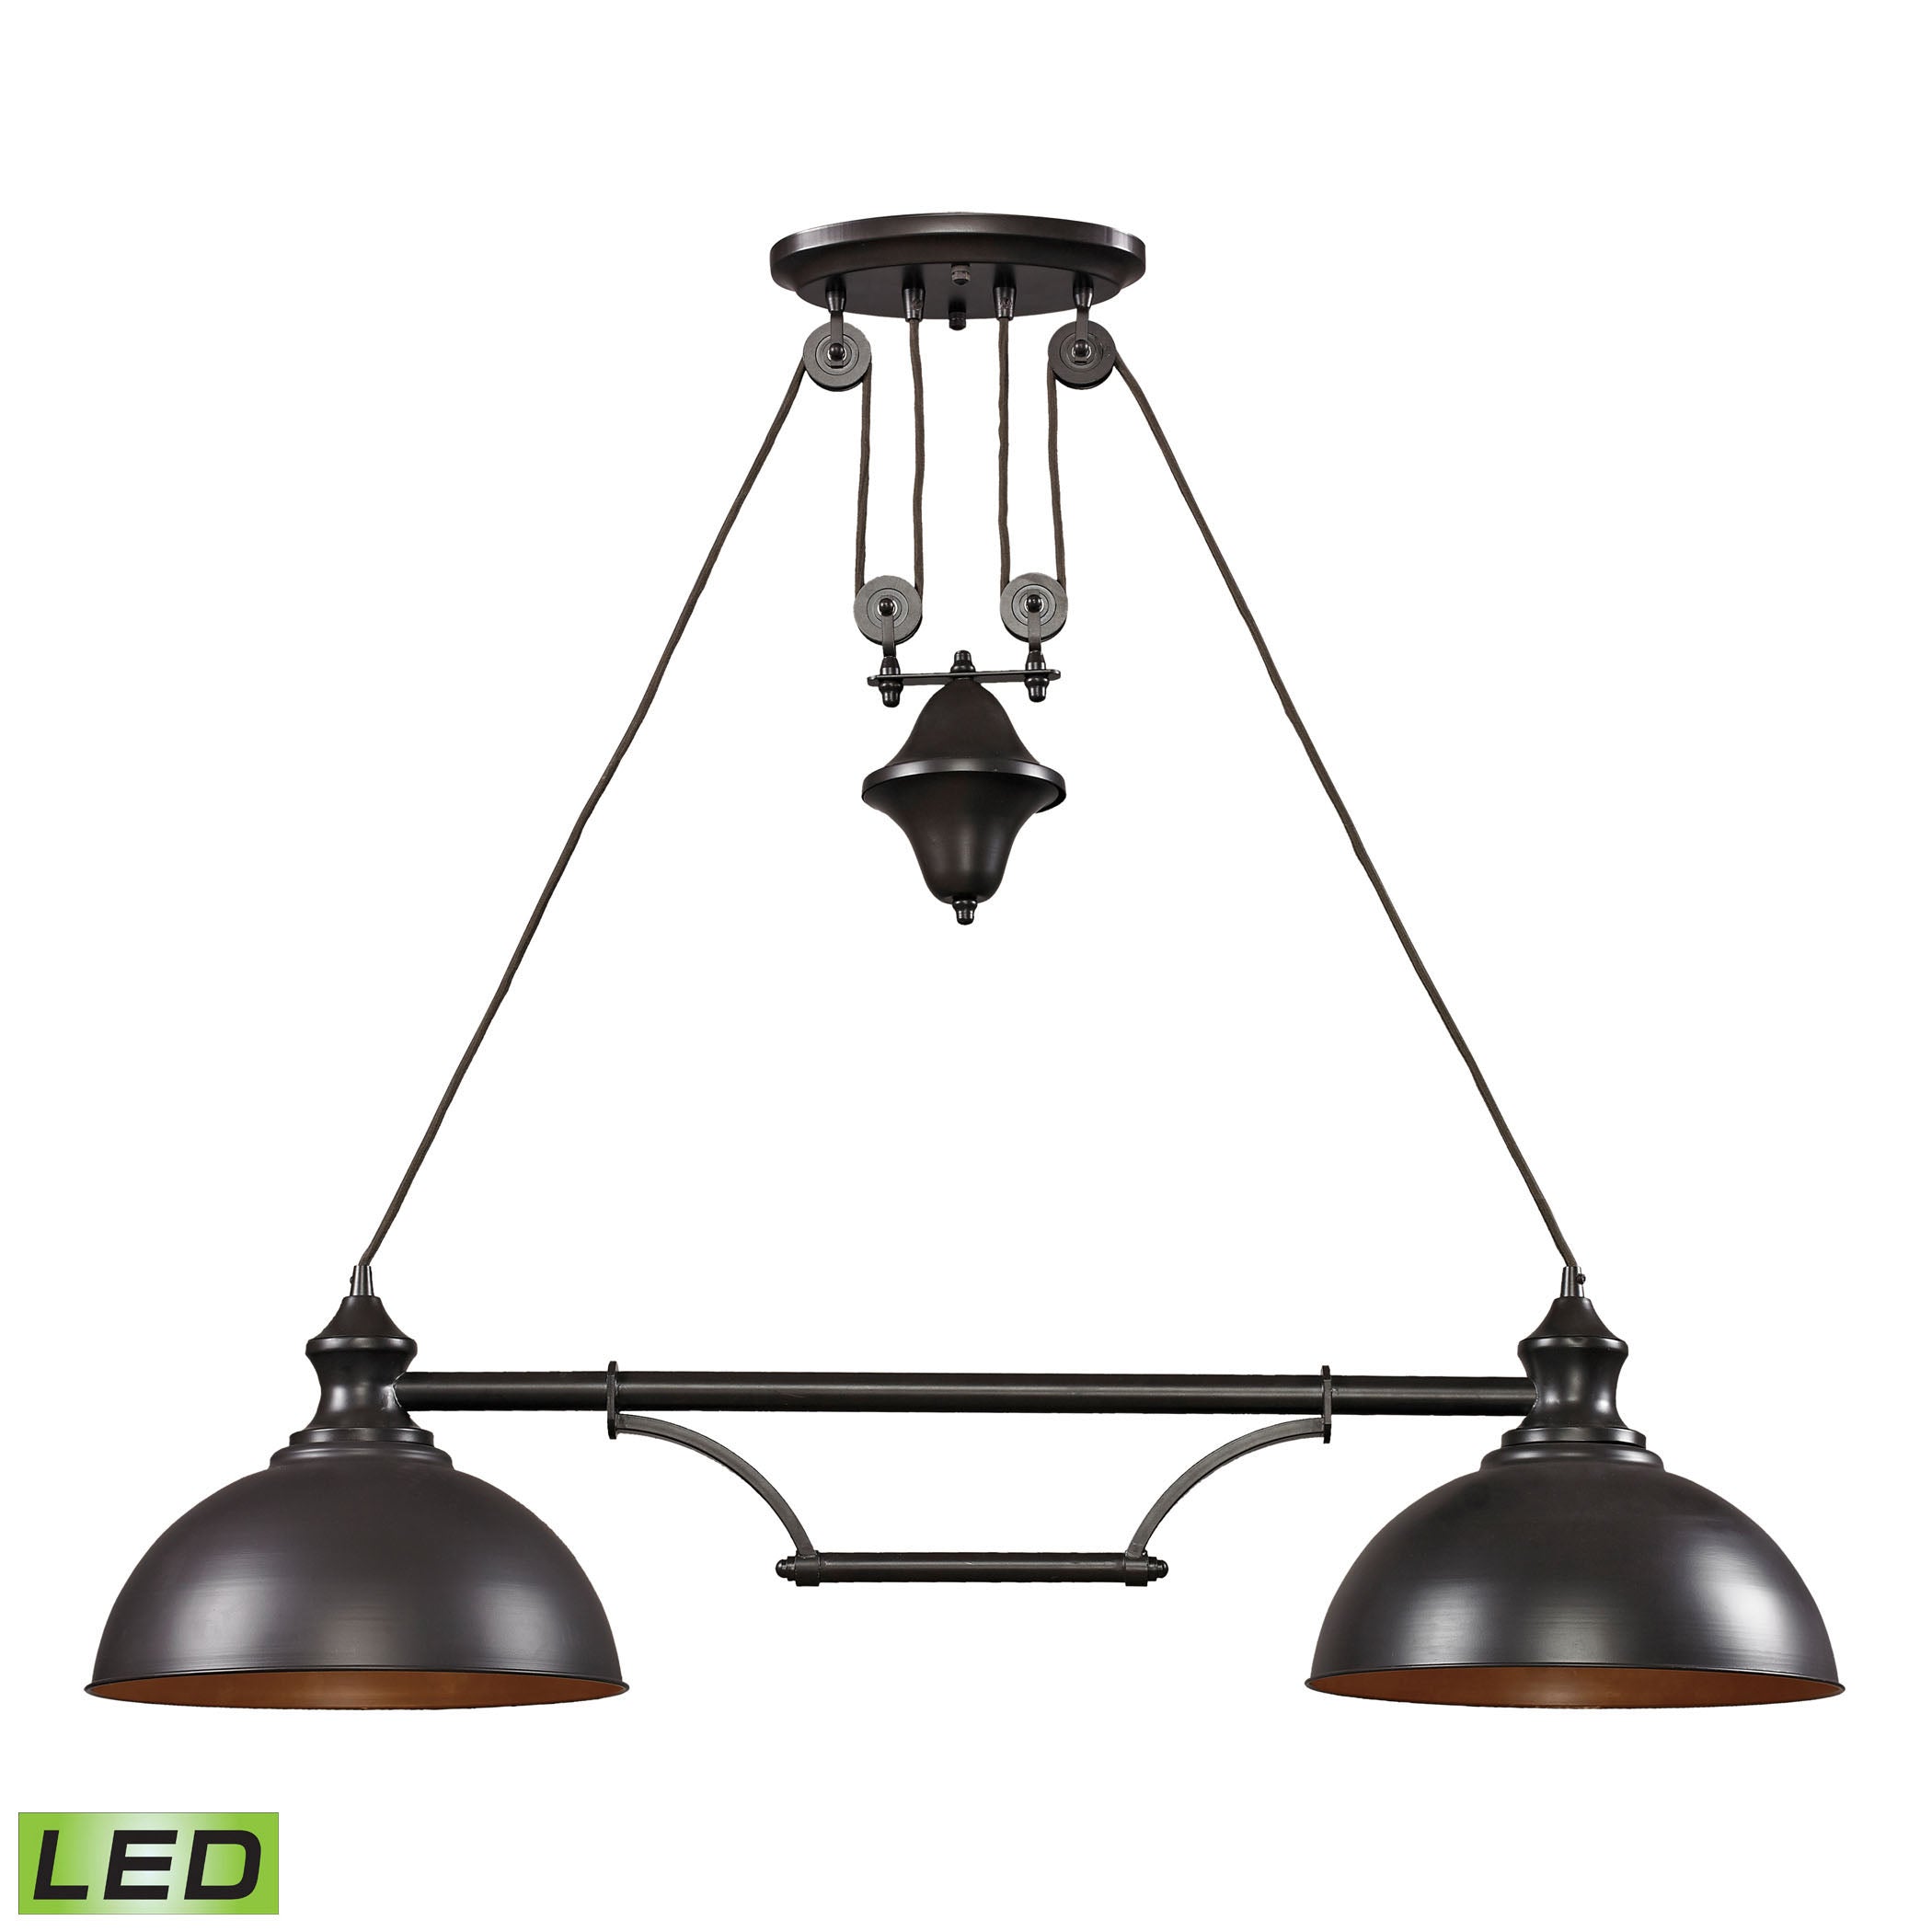 ELK Lighting 65150-2-LED Farmhouse 2-Light Island Light in Oiled Bronze with Matching Shade - Includes LED Bulbs